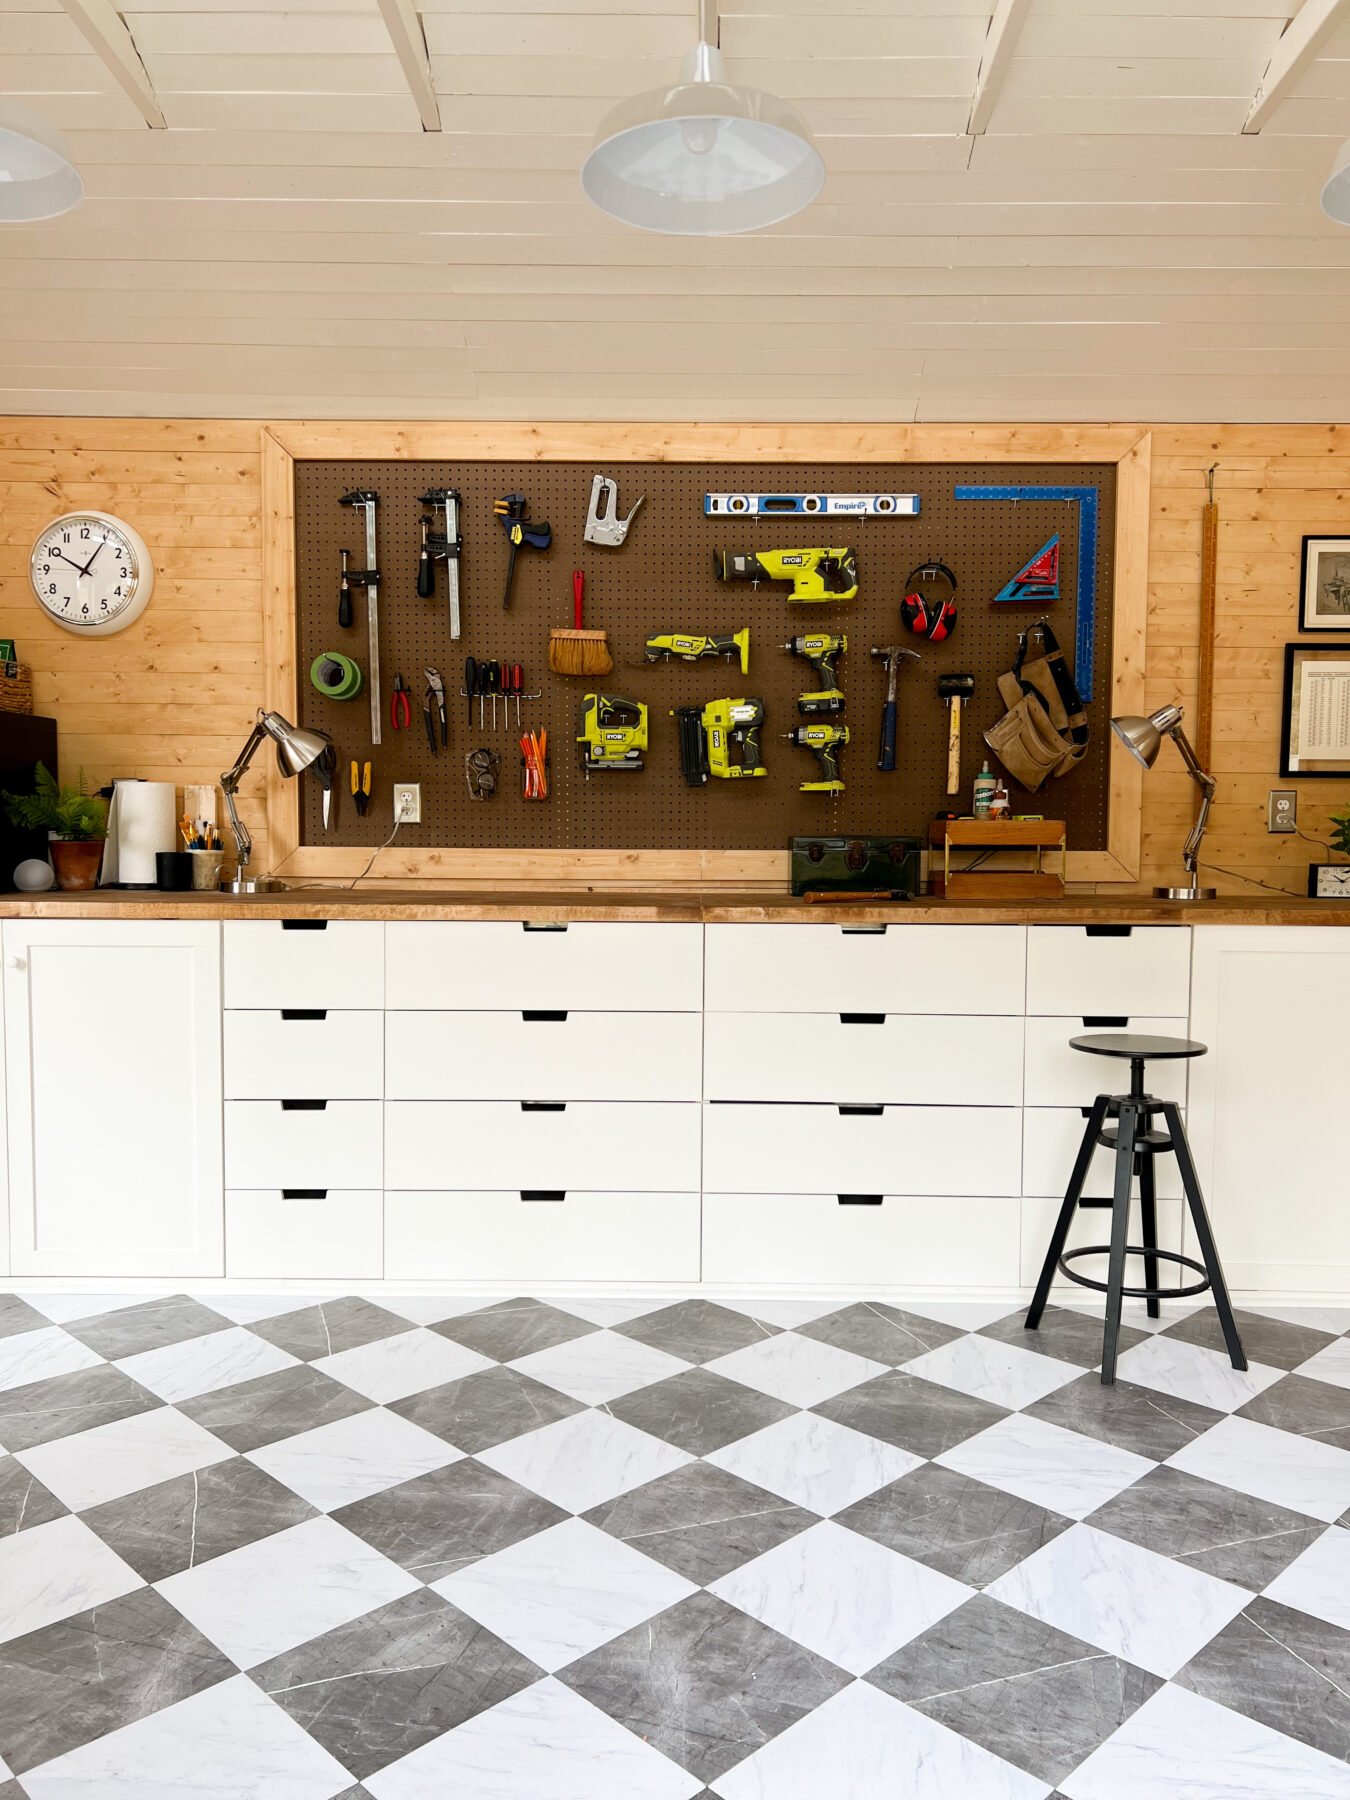 Cass' workbench and tool storage pegboard finish out the DIY workshop.